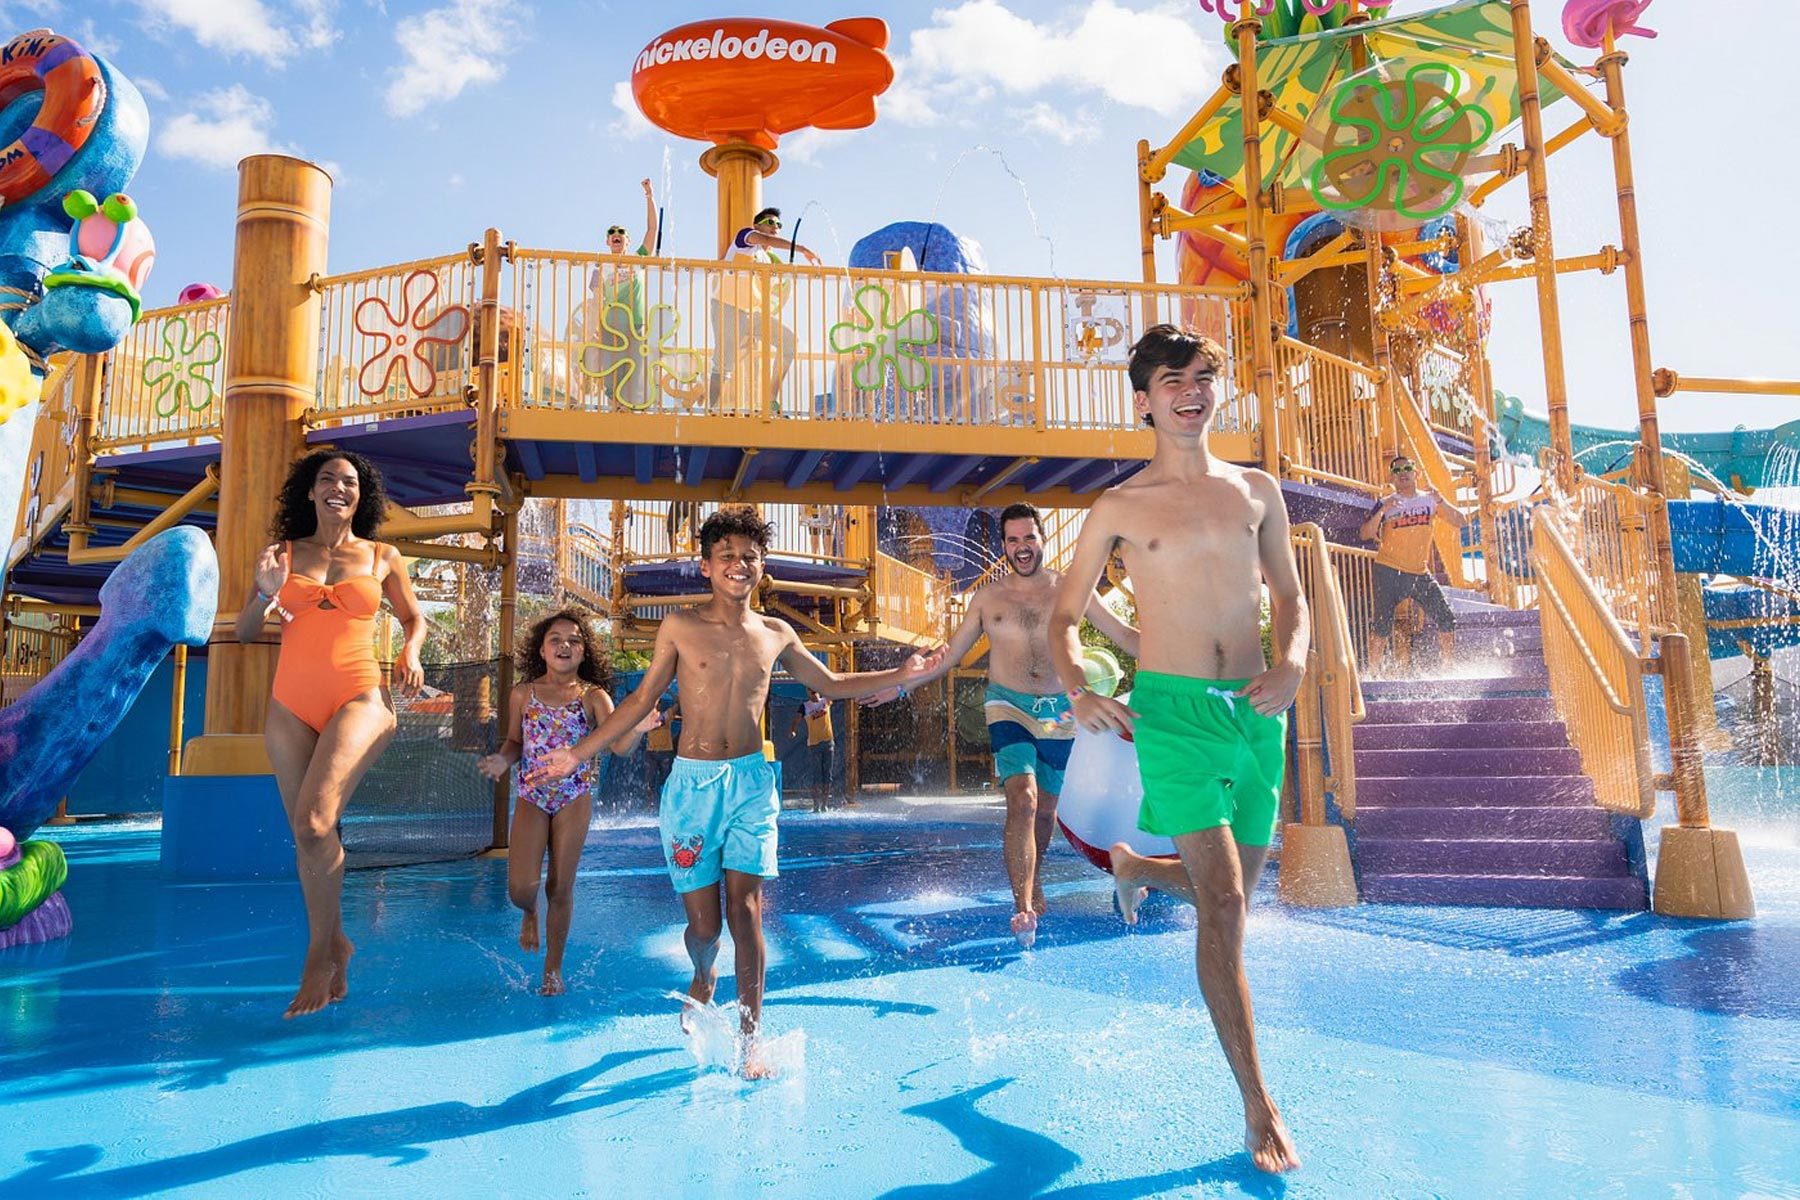 <h3 class=""><strong>Nickelodeon Hotels & Resorts Riviera Maya</strong></h3> <p>For your next <a href="https://www.rd.com/list/affordable-family-vacations/" rel="noreferrer noopener noreferrer">family vacation</a>, consider <a href="https://www.tripadvisor.com/Hotel_Review-g663501-d23184727-Reviews-Nickelodeon_Hotels_Resorts_Riviera_Maya-Playa_Paraiso_Playa_del_Carmen_Yucatan_Penins.html" rel="noopener noreferrer">Nickelodeon Hotels & Resorts Riviera Maya</a>. With a plethora of kid-friendly activities and amenities, including a six-acre water park with more than 20 slides, this one-of-a-kind property is among the best Riviera Maya resorts for young families. Little ones will have the opportunity to meet their favorite Nickelodeon characters during bucket-list-worthy activities like getting slimed (yes, really!). For something a little less, ahem, messy, you can take the kiddos to Club Nick (a kids-only hot spot with a giant ball pit and a two-story slide) or Plaza Orange (which hosts fun-filled dance parties).</p> <p>Otherwise, consider a family kayaking adventure or tennis match. If your kids are picky eaters, you can breathe easily knowing there are plenty of child-friendly options here, with six restaurants and four food kiosks (plus, for the grown-ups, three different bars). For a worth-it splurge, rent a plush cabana, treat the kids to a character breakfast or dinner, and indulge in a little self-care at the spa.</p> <p>Perhaps the best part of staying here is knowing that each accommodation (with the exception of the signature suites) has swim-up access and enough room to comfortably sleep families of five (and there are not one but two bathrooms!). To take your stay to the next level, spring for one of the signature suites, which are themed to your favorite Nickelodeon shows, like <em>Teenage Mutant Ninja Turtles</em> and <em>Spongebob Squarepants</em>. They also have private pools and butler service.</p> <p><strong>Pros:</strong></p> <ul> <li class="">Designed top to bottom with young kids in mind</li> <li class="">Complimentary on-site water park</li> <li class="">Accommodations designed to fit families of five (complete with two bathrooms), featuring either swim-up access or private pools</li> </ul> <p><strong>Cons:</strong></p> <ul> <li class="">It can get crowded here at peak times, such as during holiday breaks and the summer months, when school's out</li> <li class="">Likely won't appeal to adults without young kids</li> </ul> <p class="listicle-page__cta-button-shop"><a class="shop-btn" href="https://www.tripadvisor.com/Hotel_Review-g663501-d23184727-Reviews-Nickelodeon_Hotels_Resorts_Riviera_Maya-Playa_Paraiso_Playa_del_Carmen_Yucatan_Penins.html">Book Now</a></p>